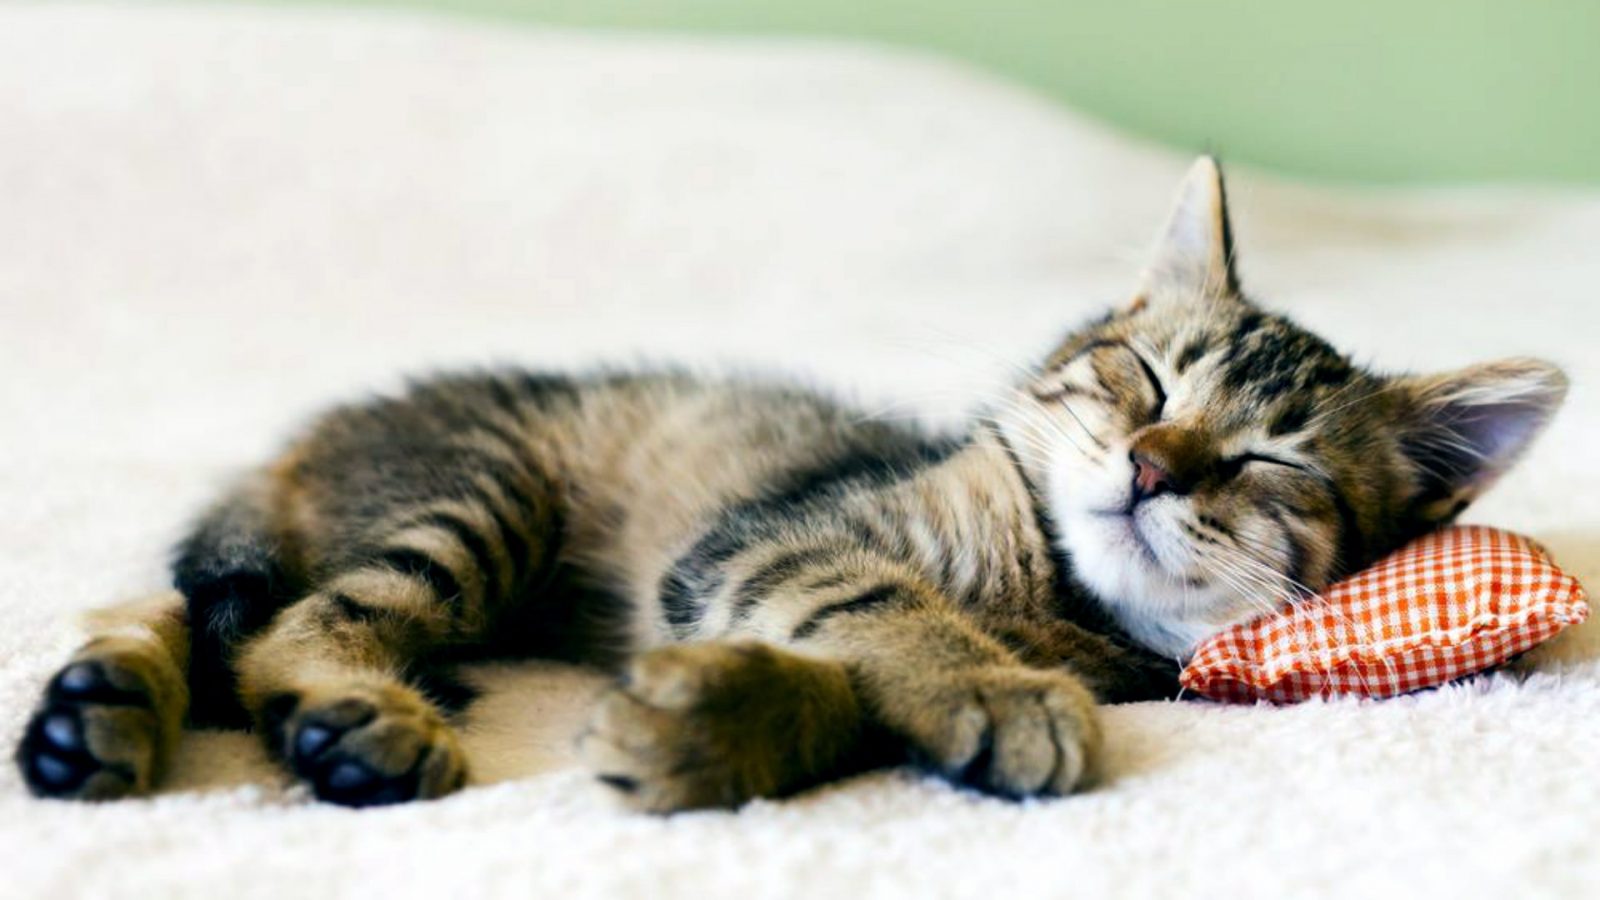 What Domestic And Wild Cat Breeds Are You A Combo Of? sleeping cat